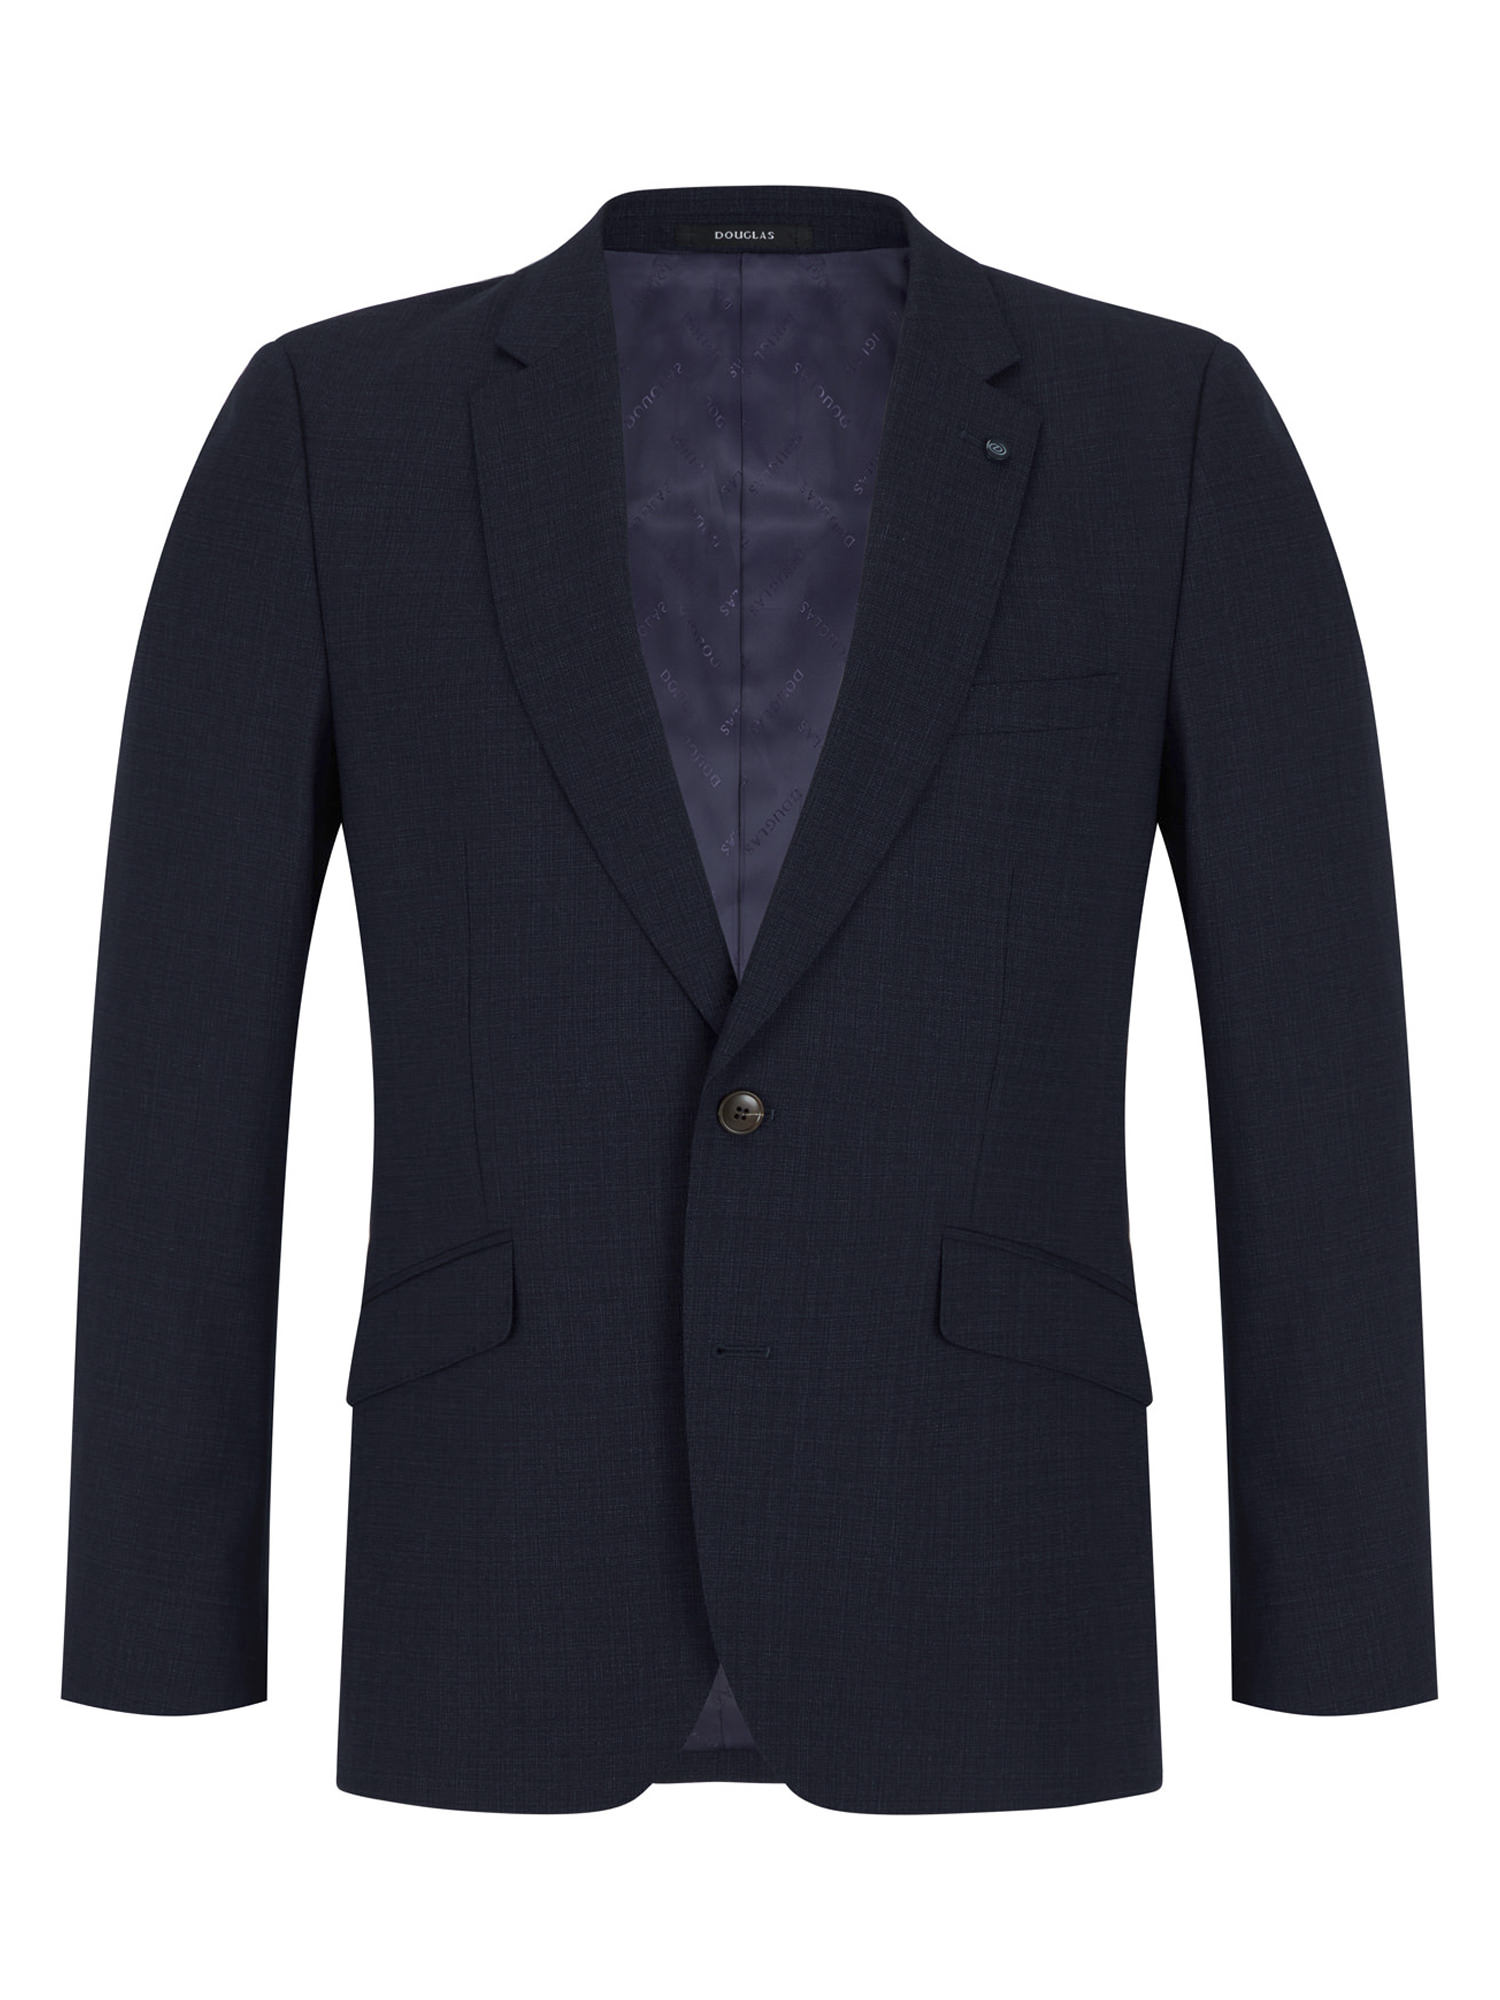 Navy Textured Weave Suit - Tom Murphy's Formal and Menswear